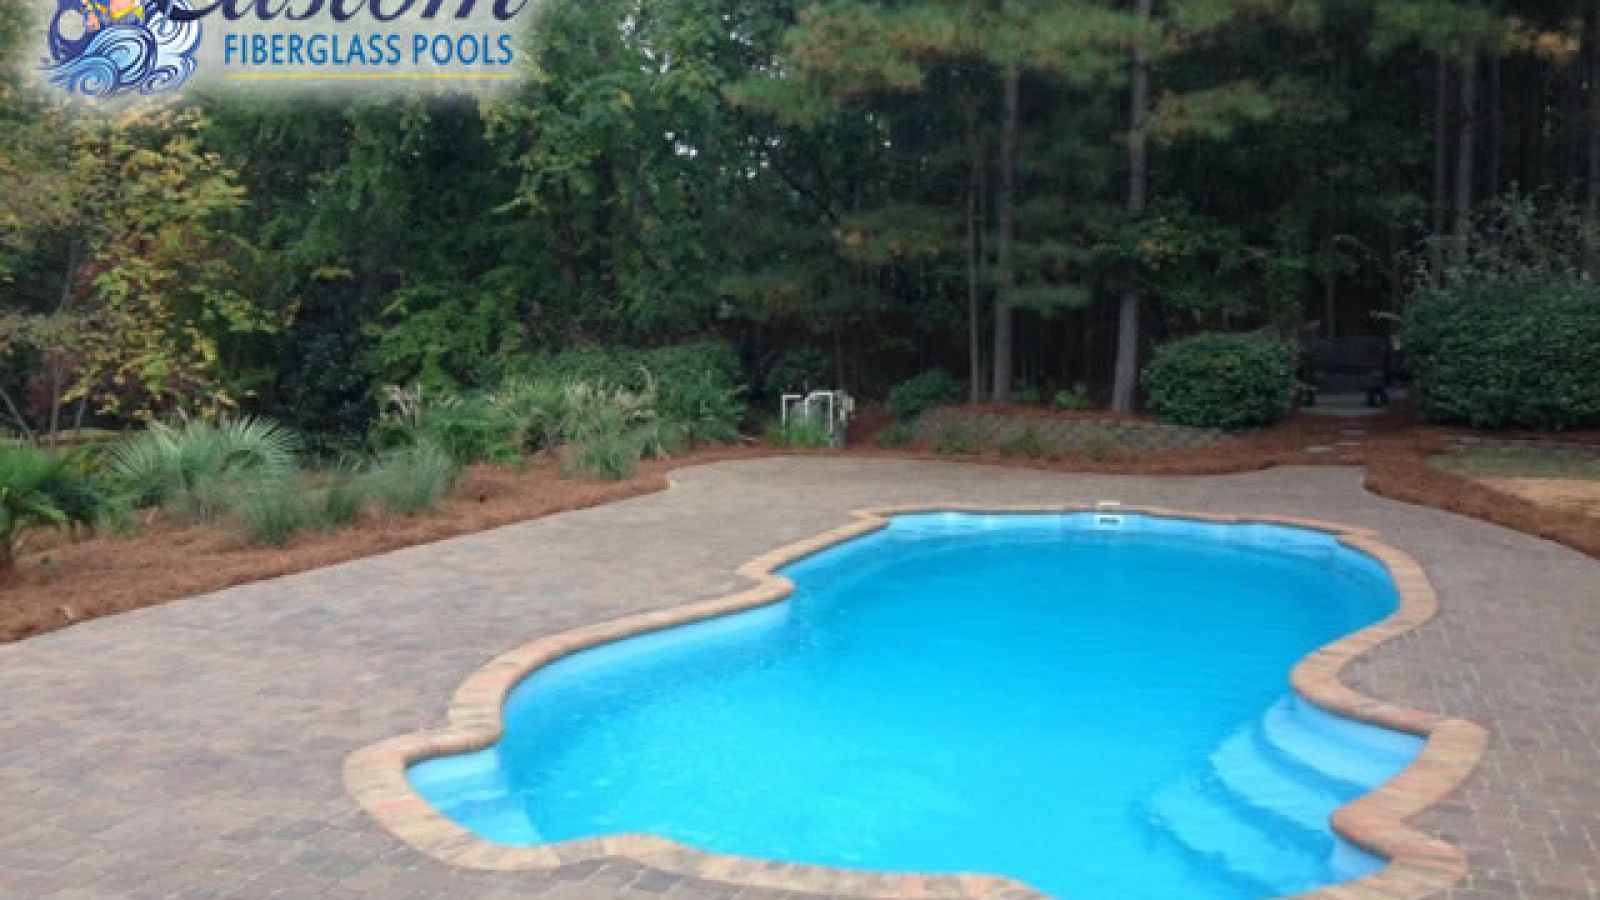 Key West Freeform Fiberglass Pool, a chic and spacious addition to a Clarksville, TN backyard